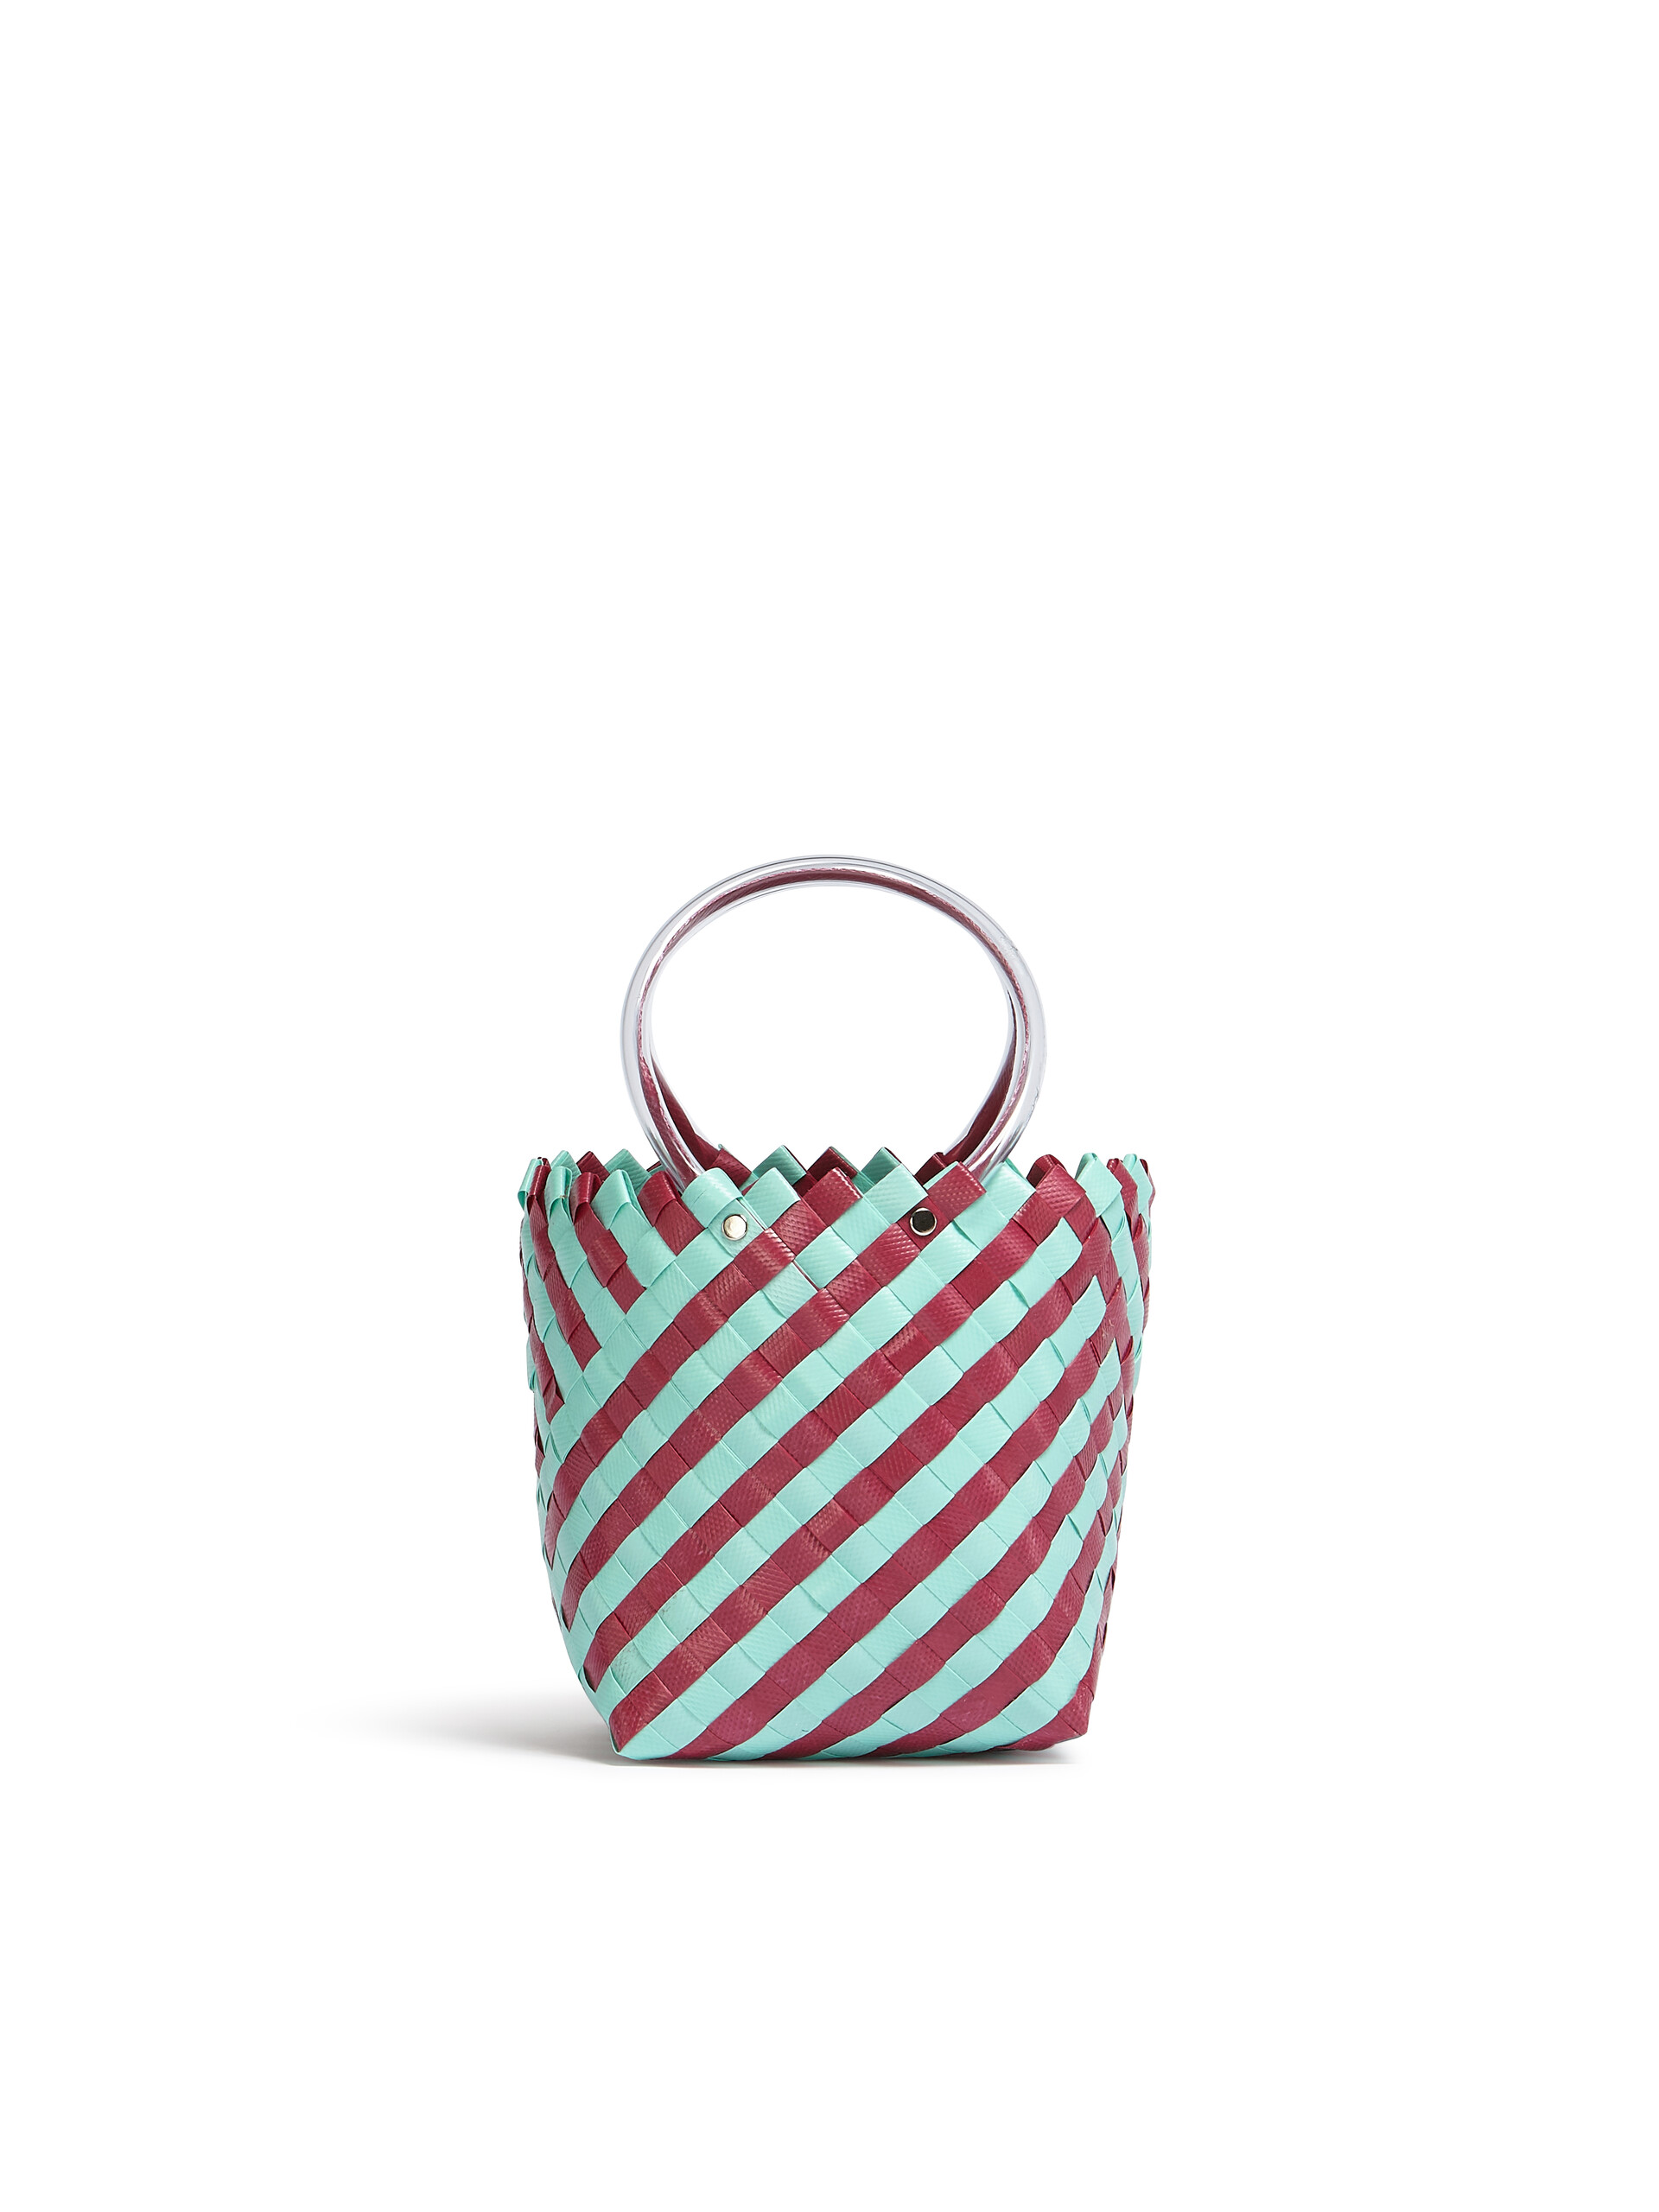 MARNI MARKET bag in green and burgundy woven material - Bags - Image 3